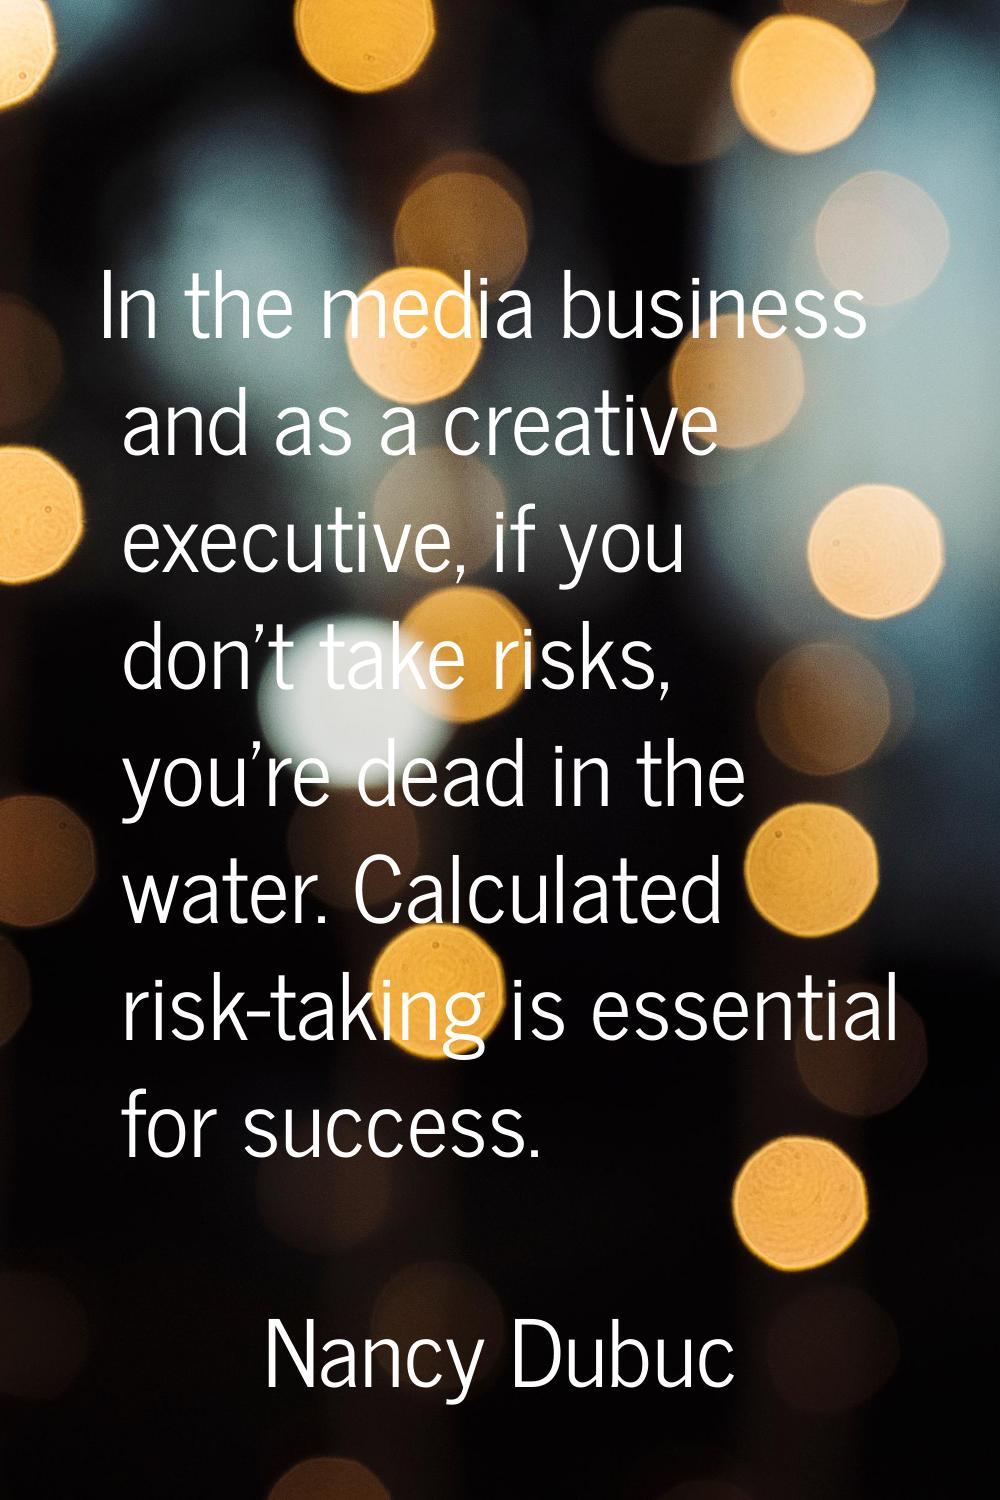 In the media business and as a creative executive, if you don't take risks, you're dead in the wate